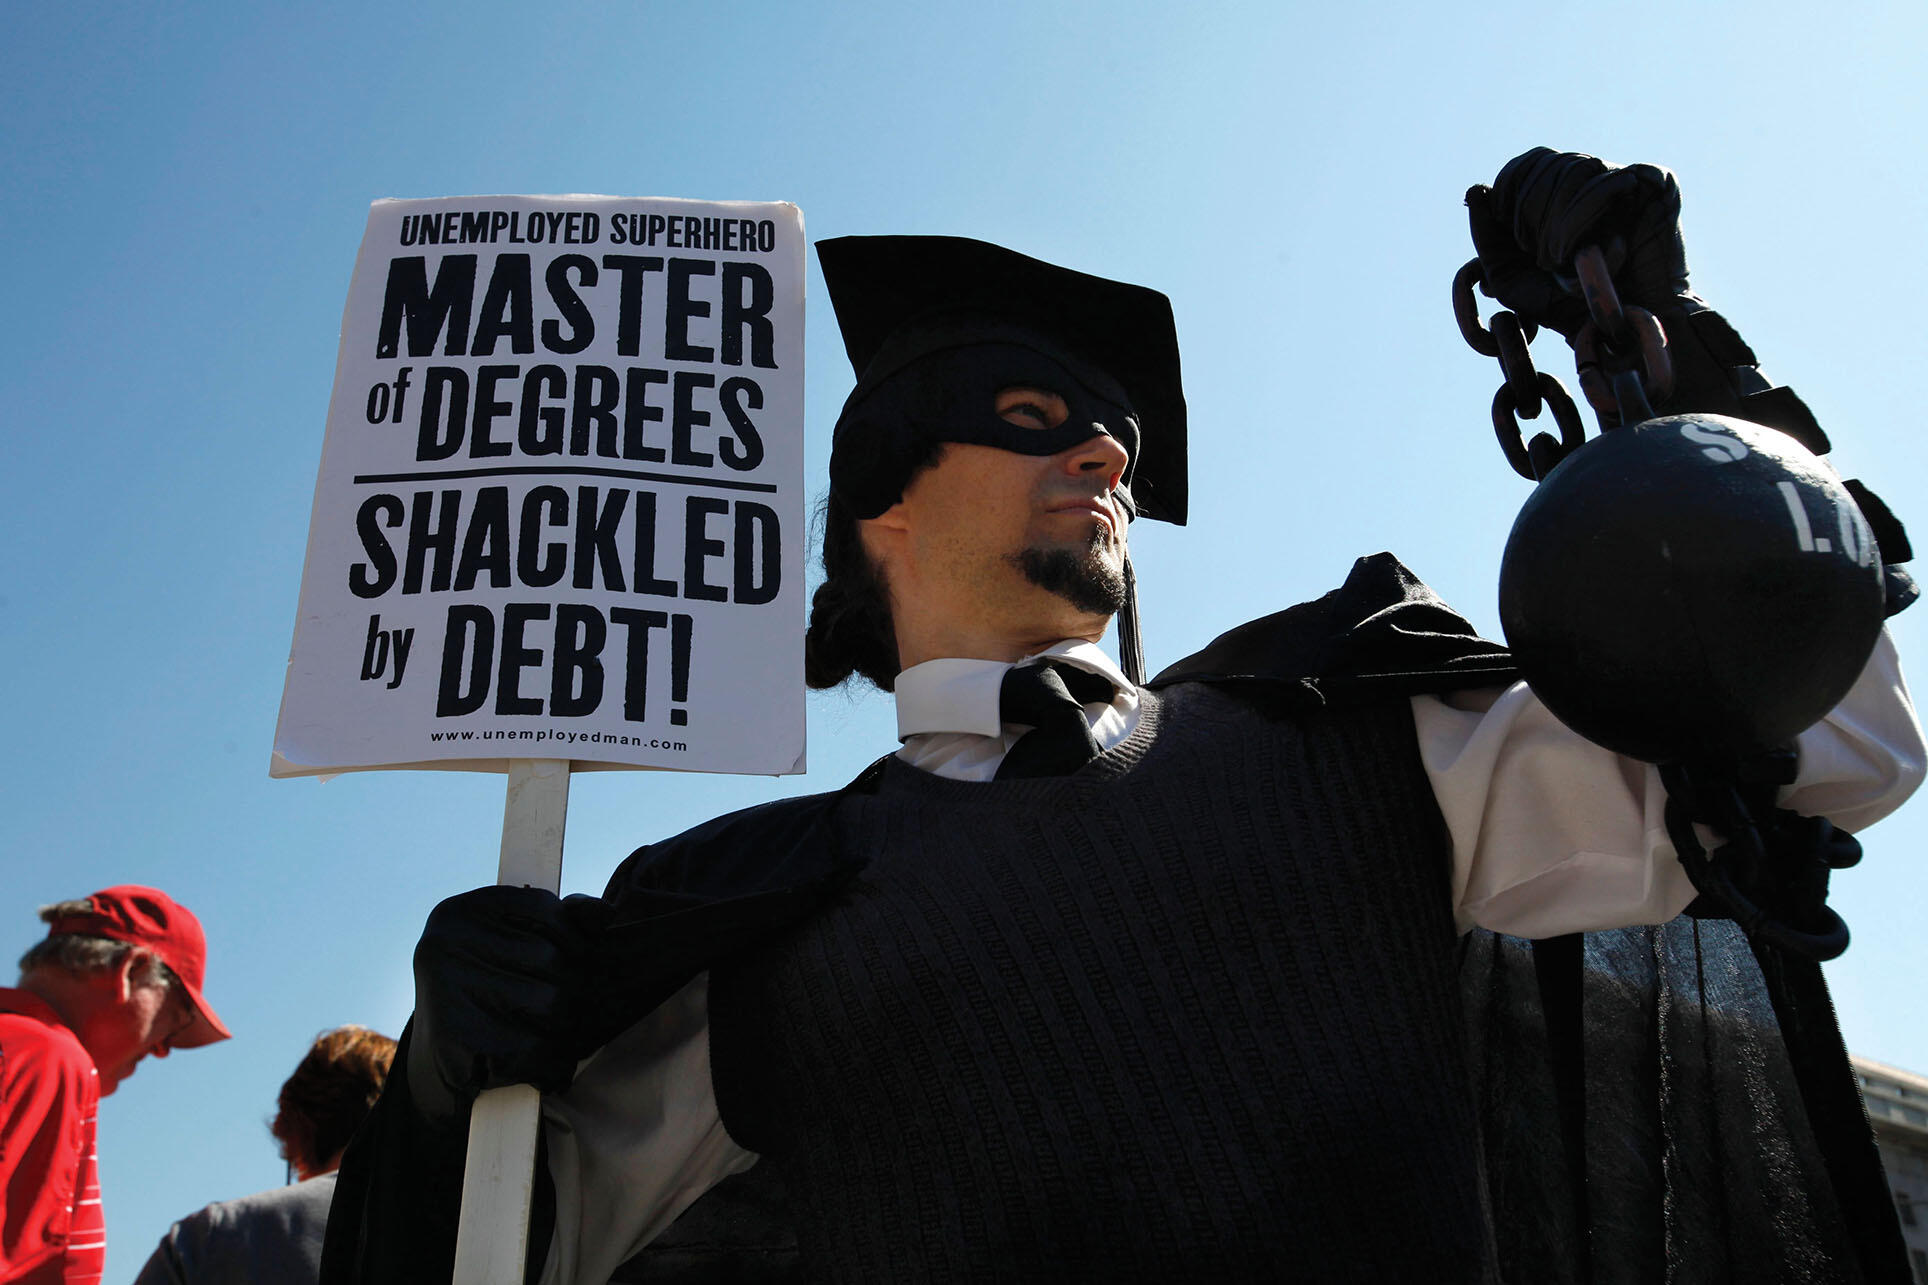 A protestor in the United States wears academic robes but holds a ball and chain symbolizing the burden of his educational debts. (Photo by Jacquelyn Martin/Associated Press.)